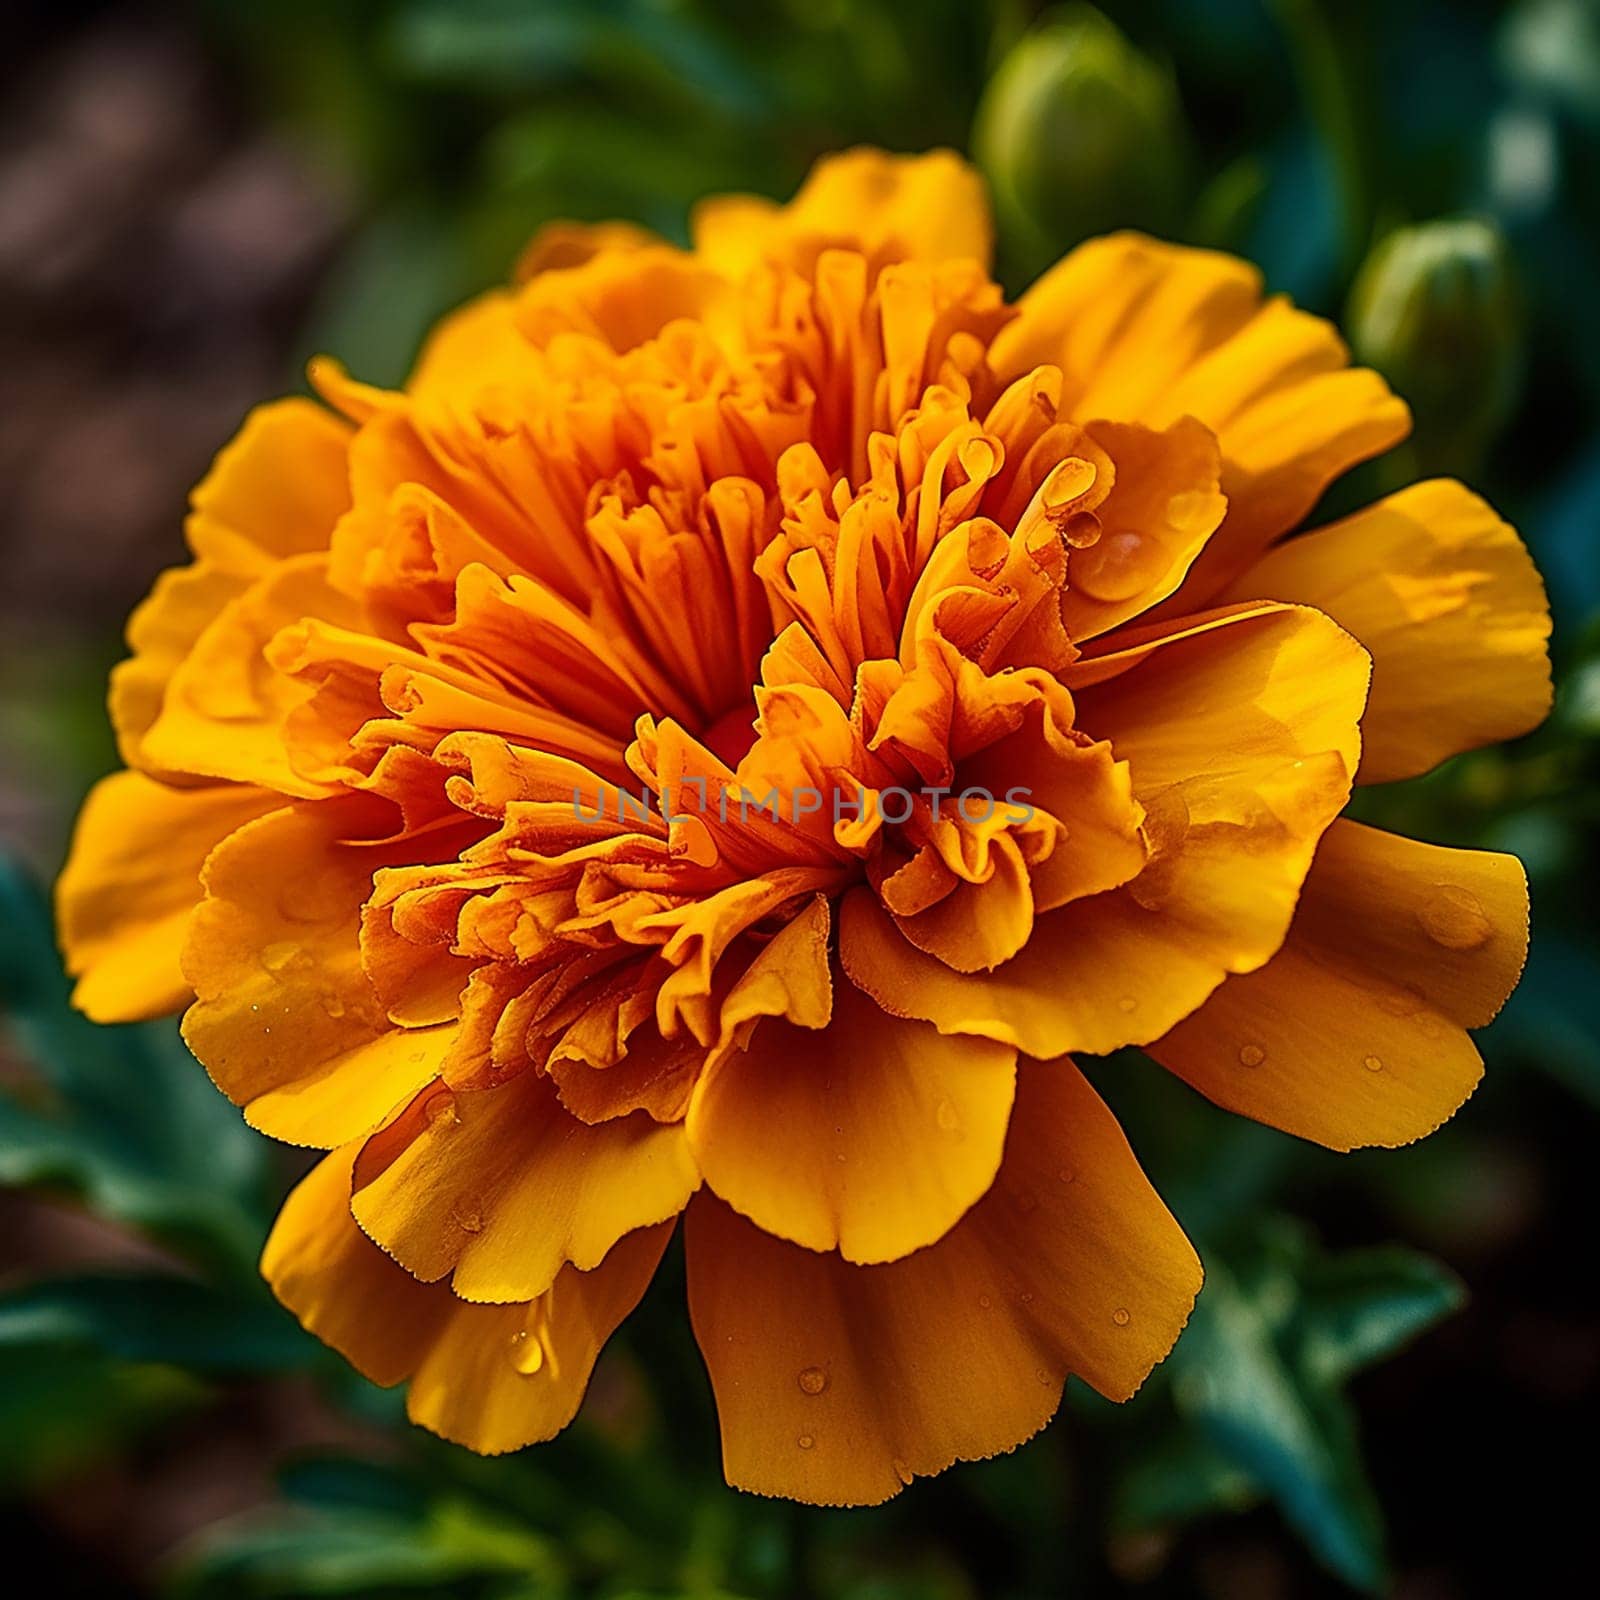 Close-up of a vibrant orange marigold with intricate petal details.